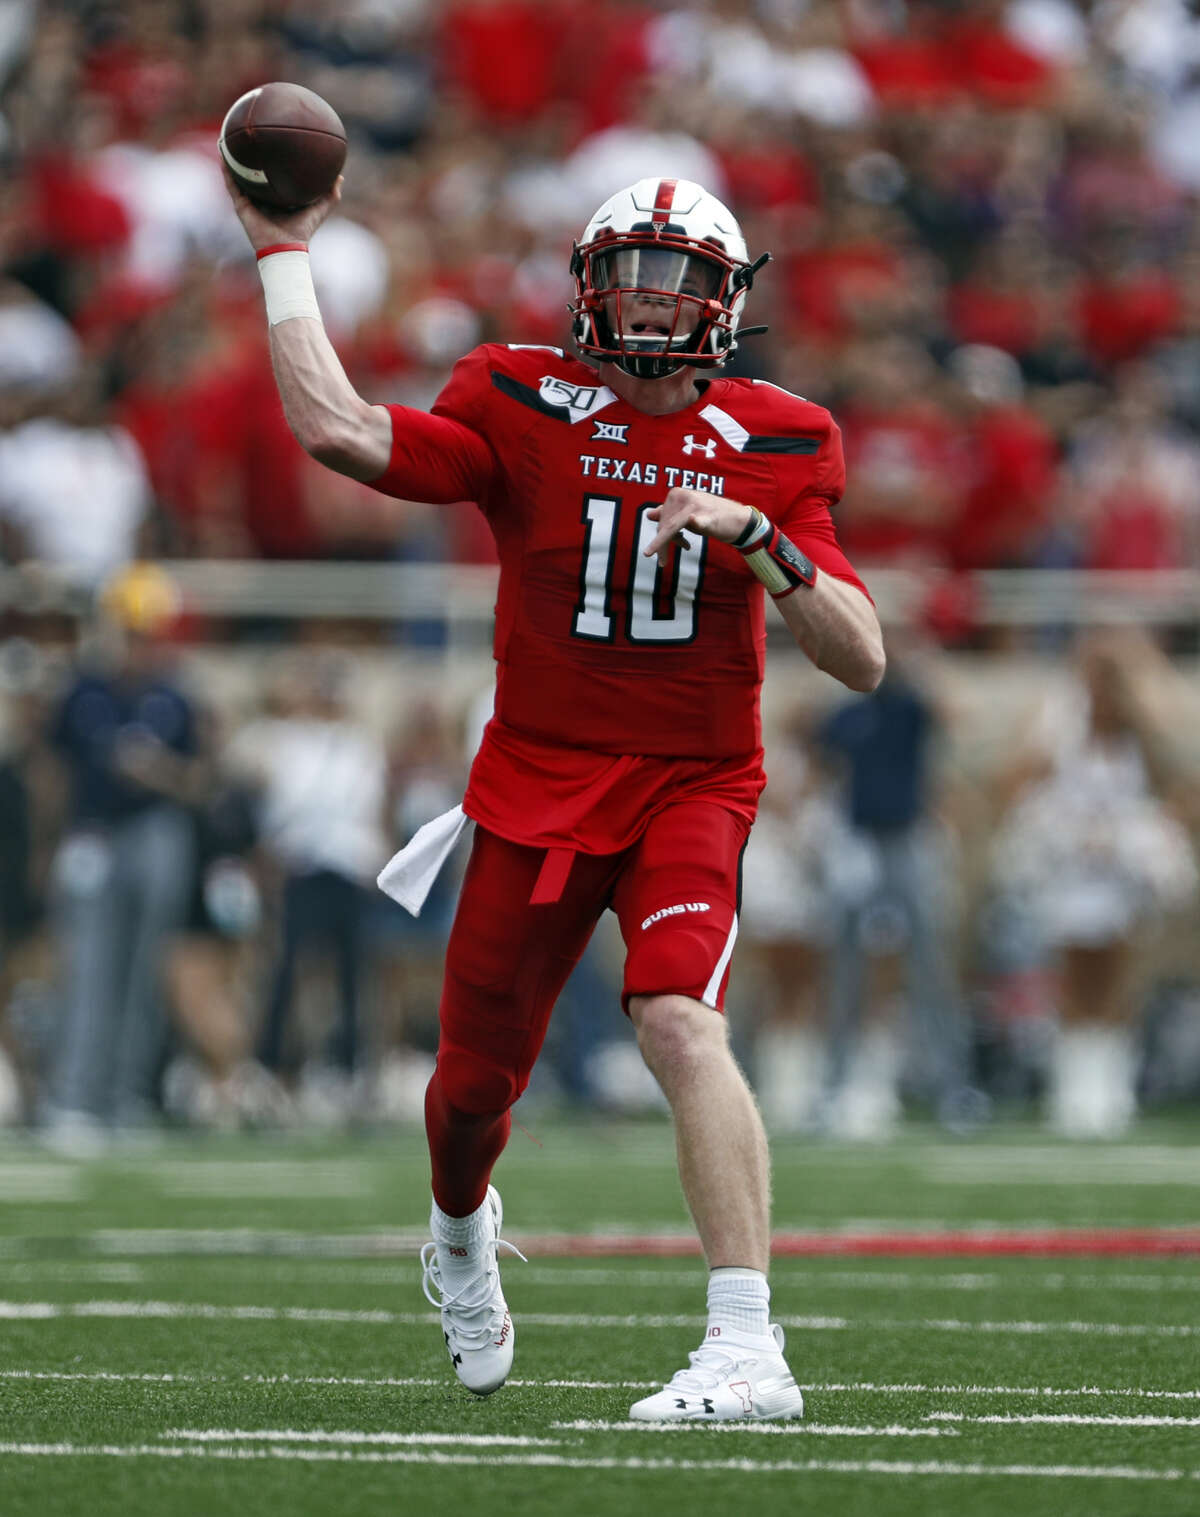 Texas Tech's Alan Bowman (10) passes the ball down field against Montana State during the first half of an NCAA college football game, Saturday, Aug. 31, 2019, in Lubbock. (Brad Tollefson/Lubbock Avalanche-Journal via AP)